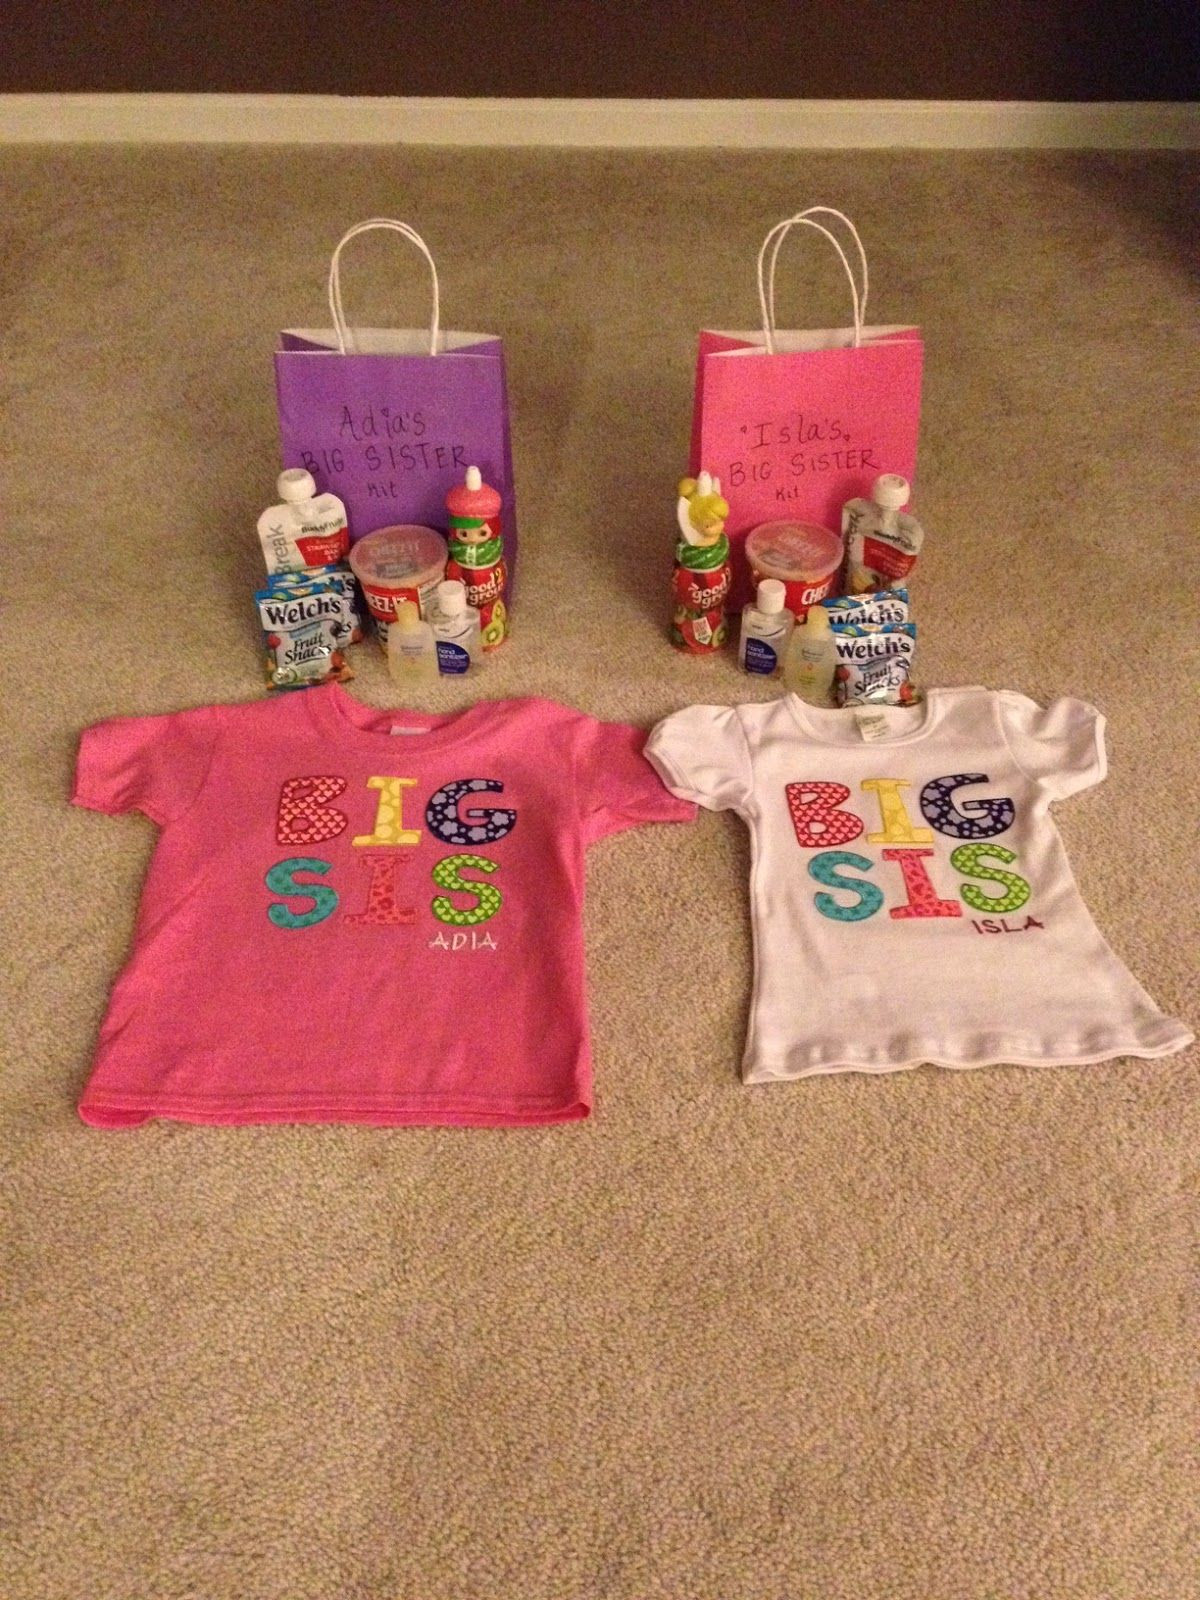 Big Brother Gift Ideas From Baby
 Big Sister Kit or Big Brother Kit ideas